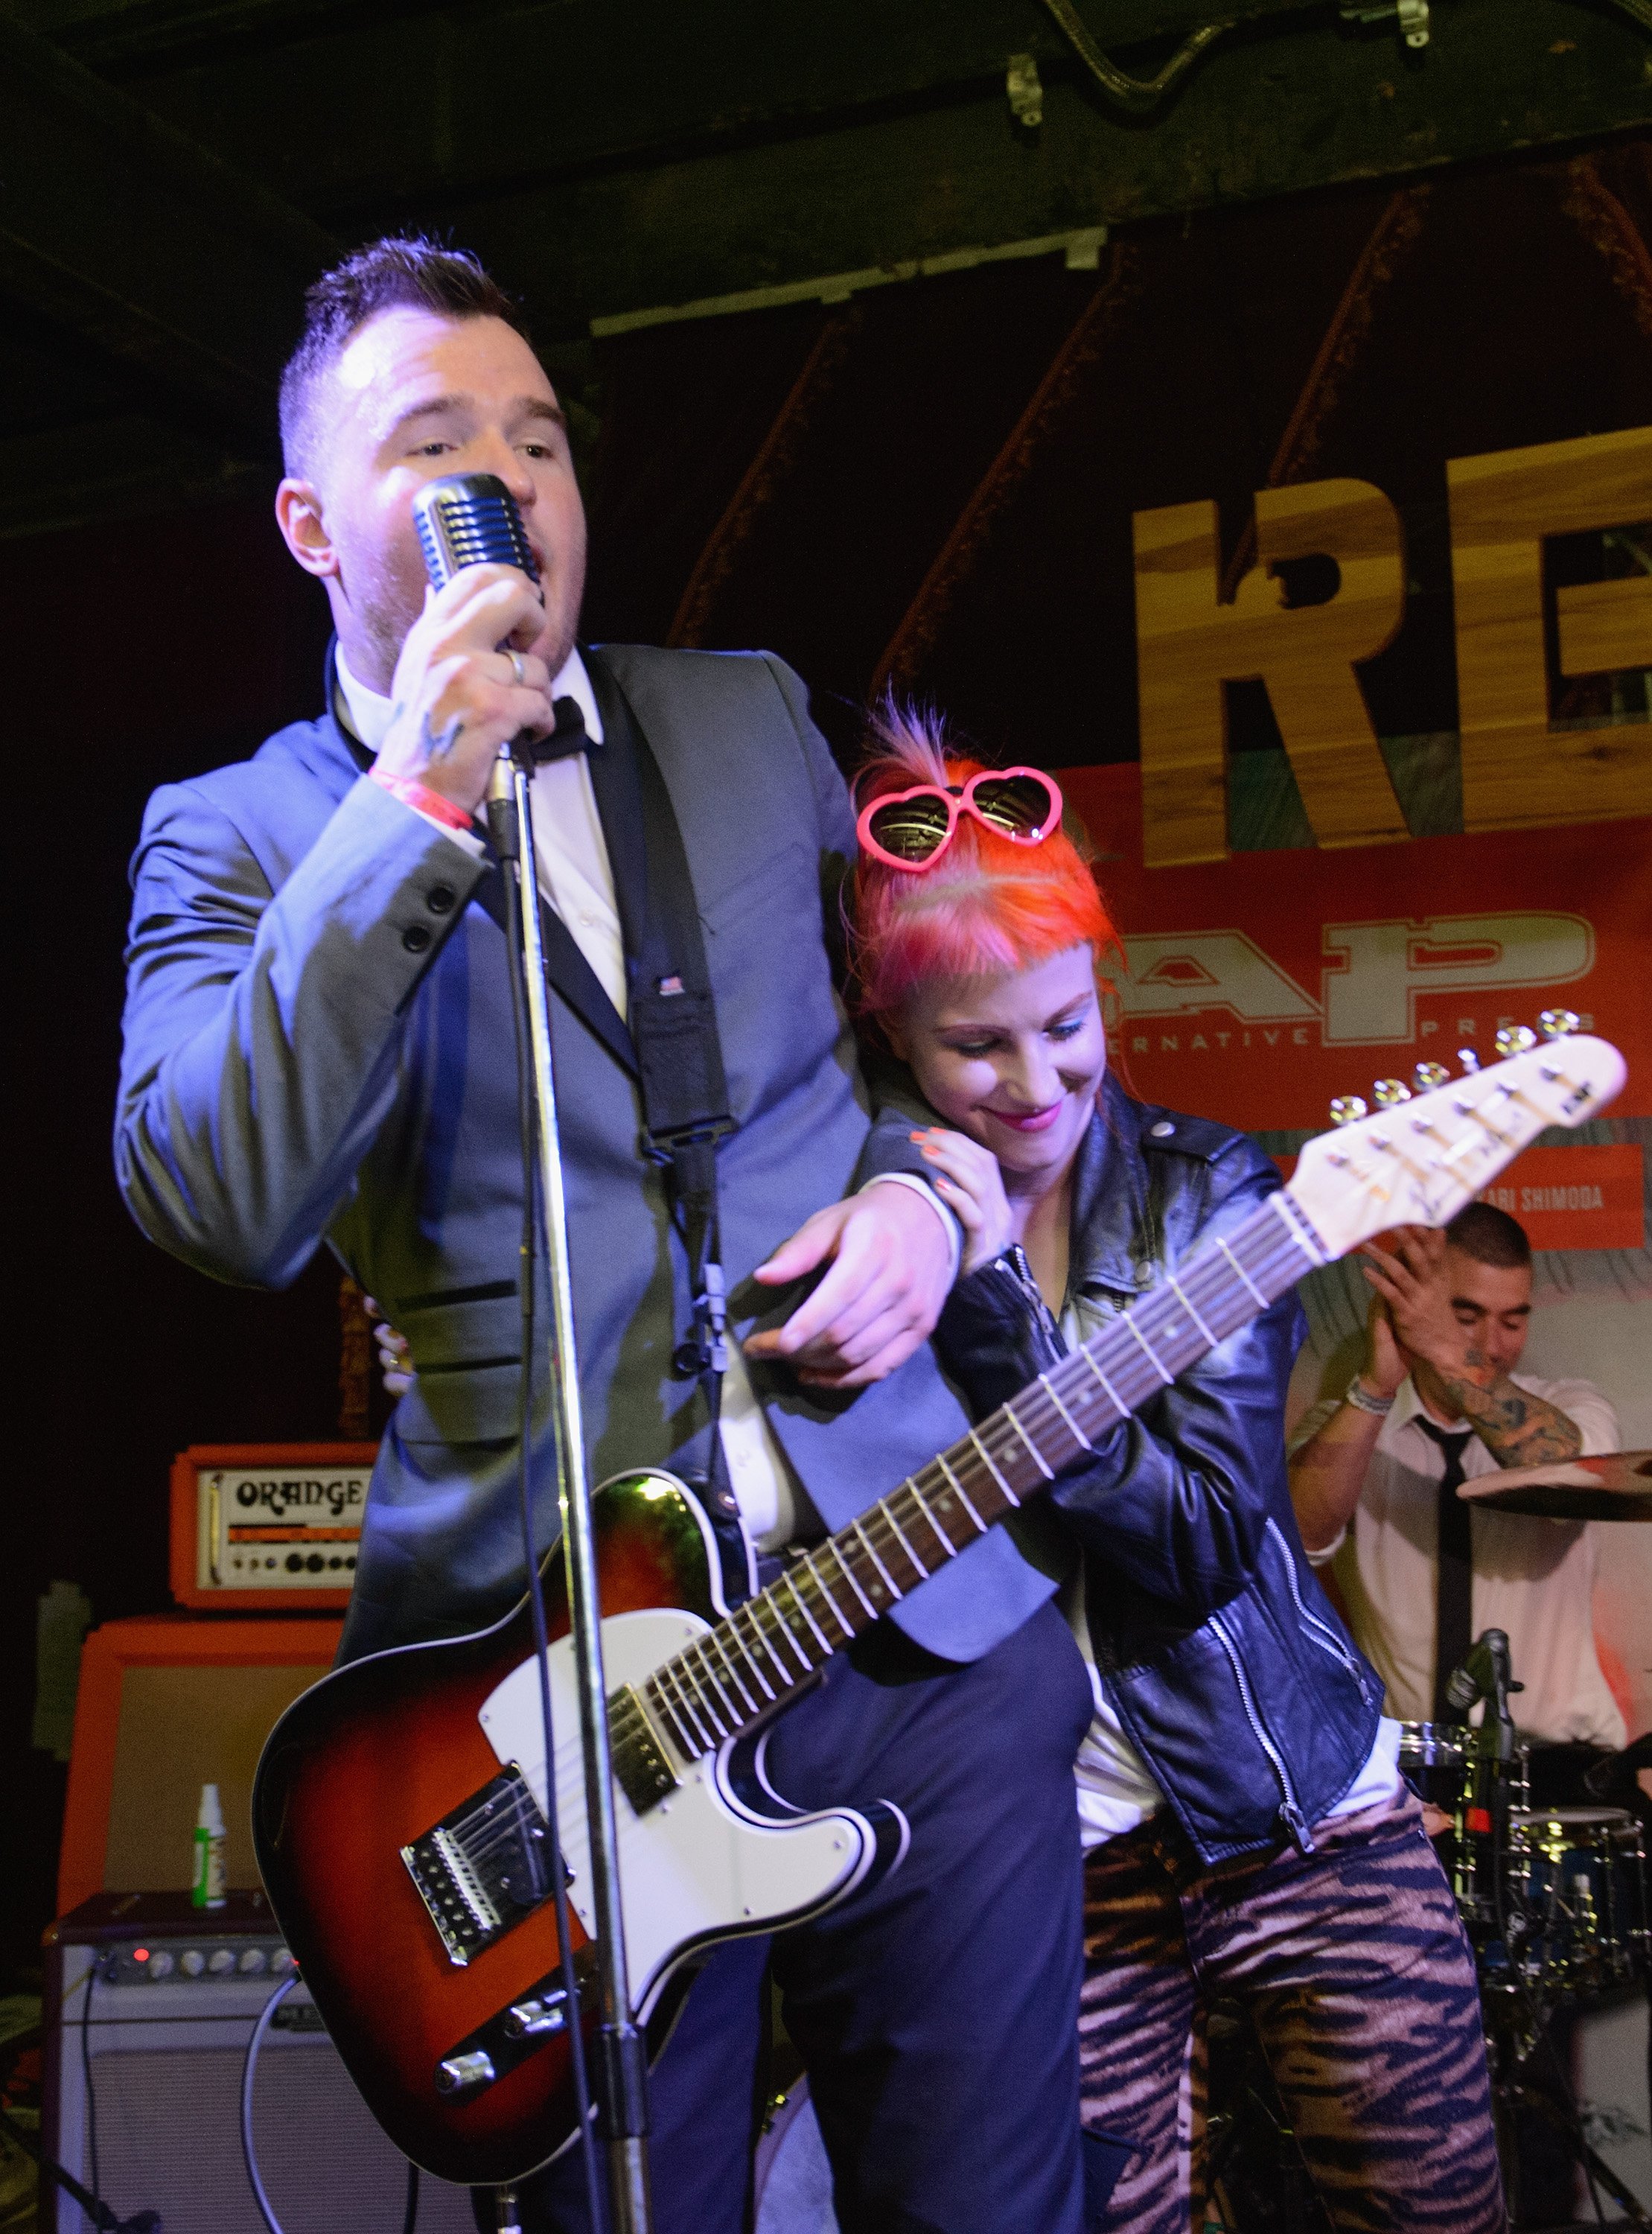  Hayley Williams i photographed with Chad Gilbert as they perform on stage during Day 5 of SXSW 2013 Music Festival on March 16, 2013, in Austin, Texas. | Source: Getty Images